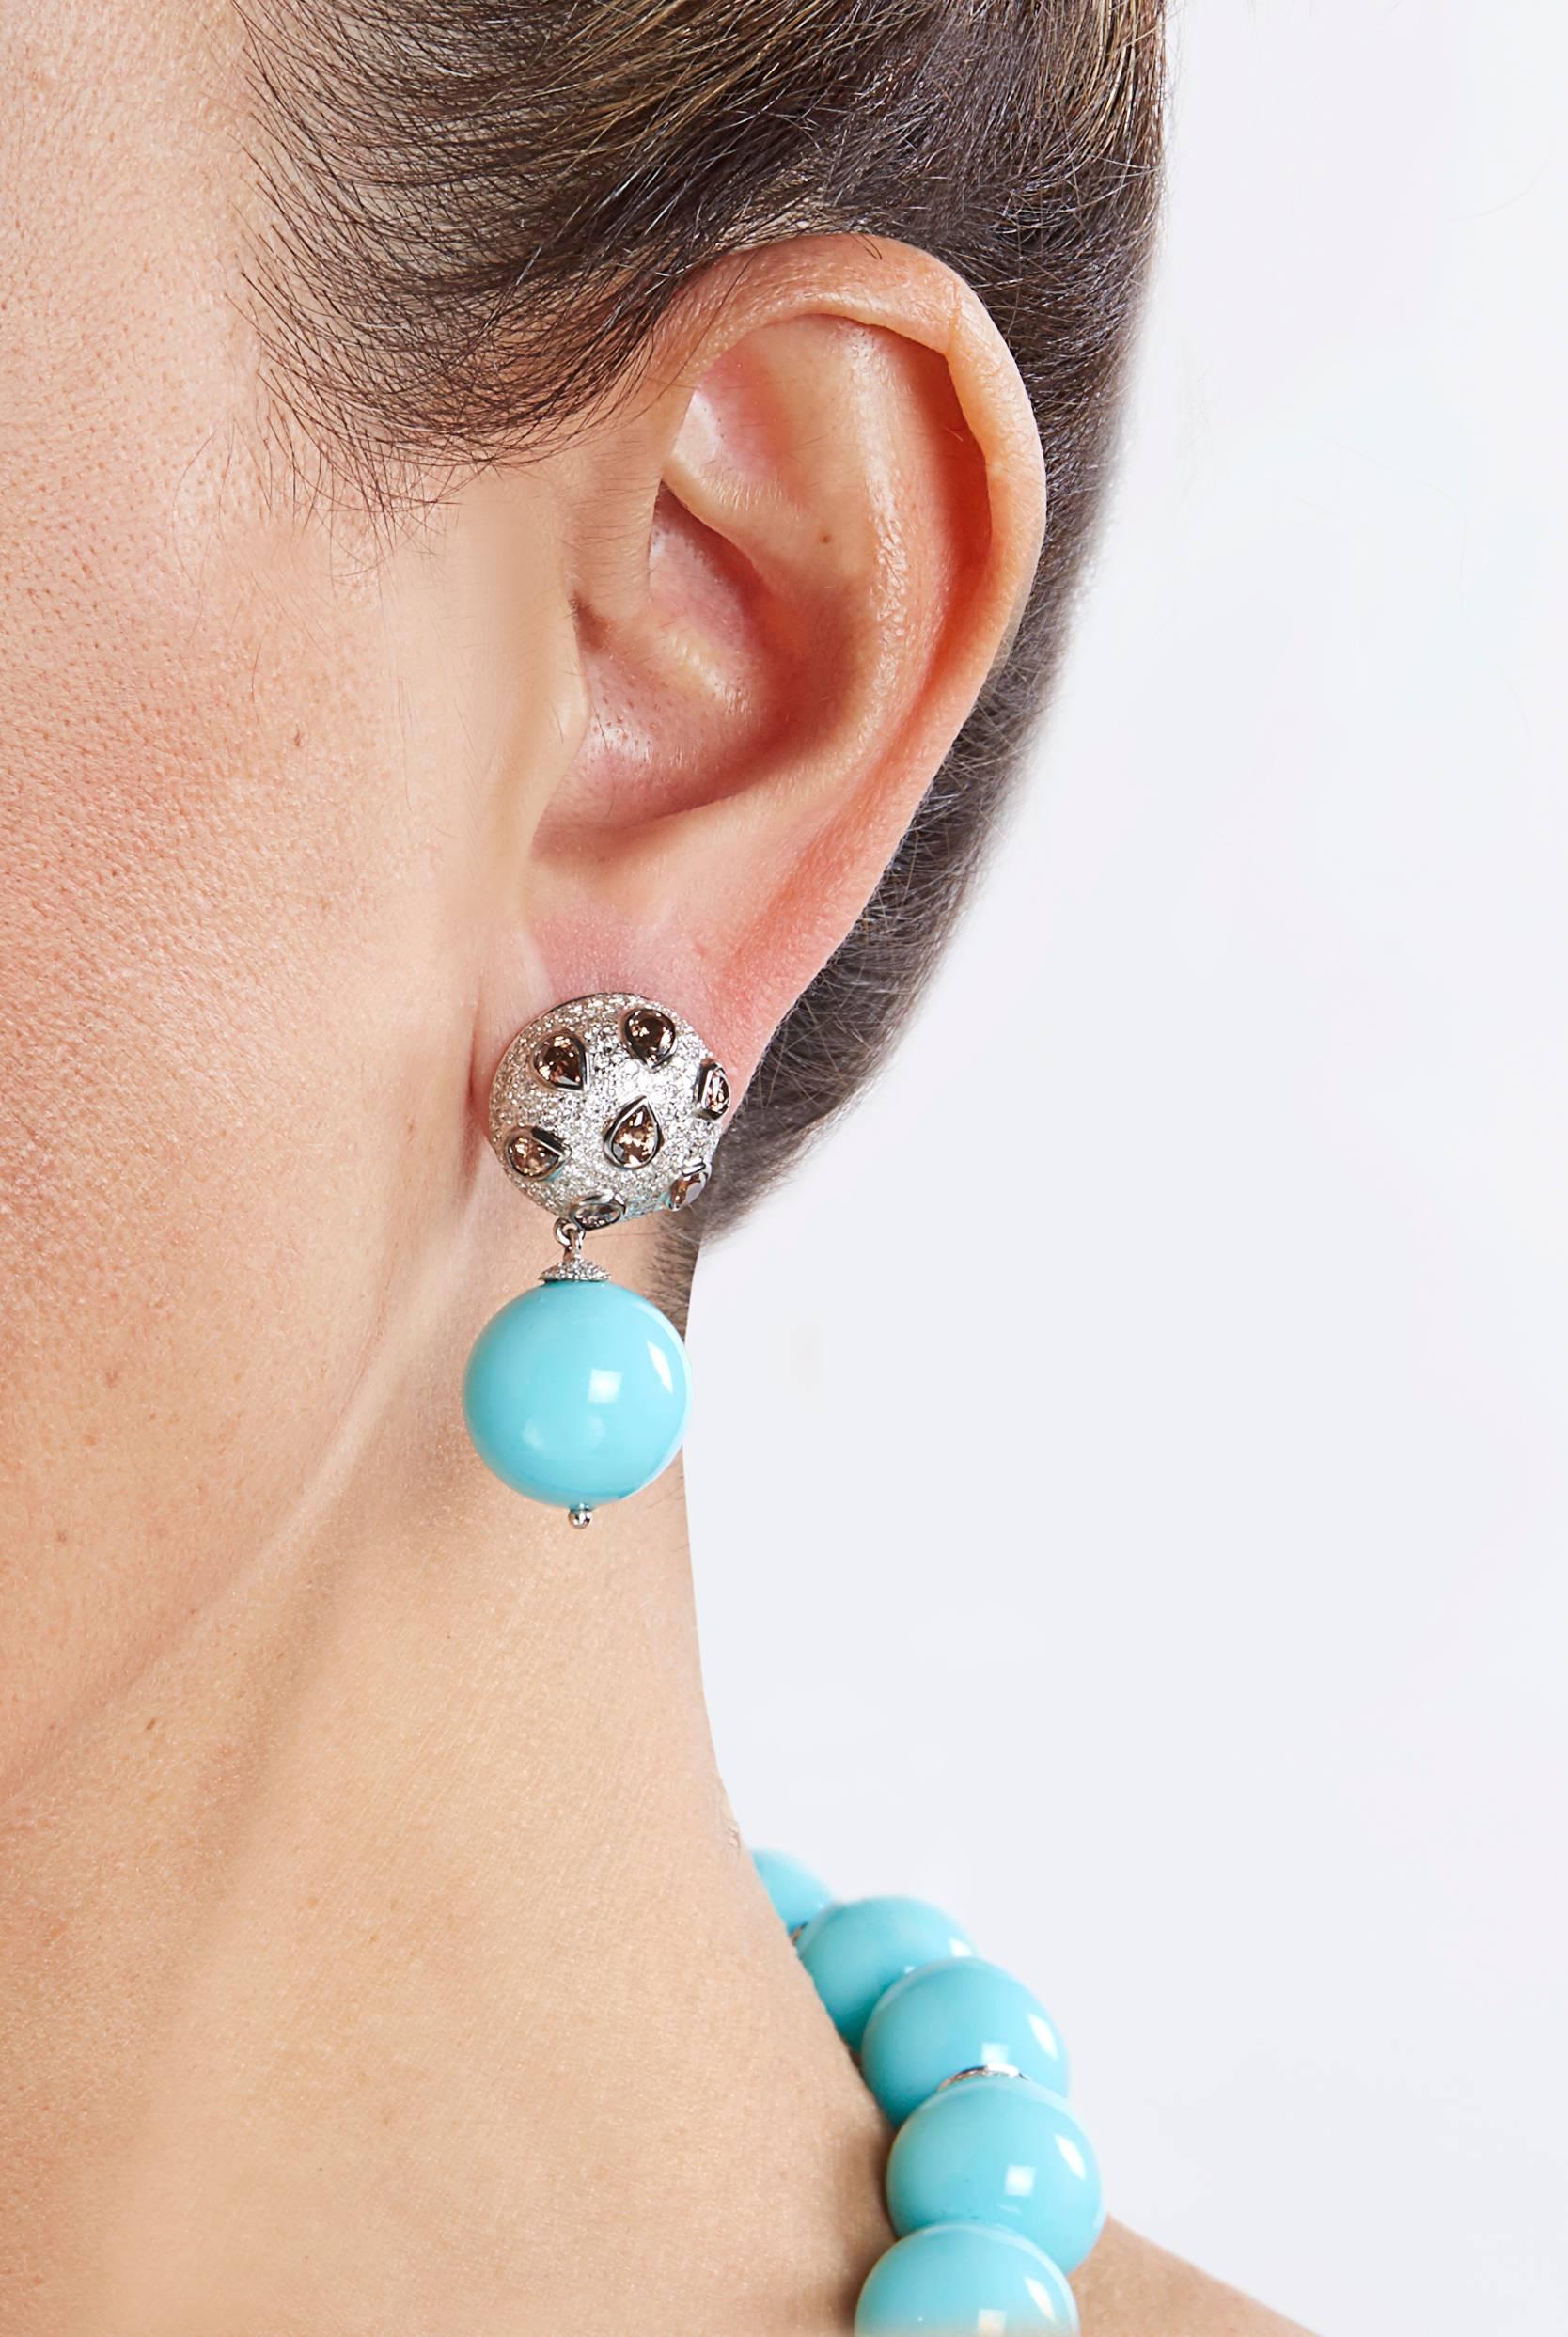 Contemporary SAM.SAAB White Gold Turquoise and Diamond Earrings For Sale